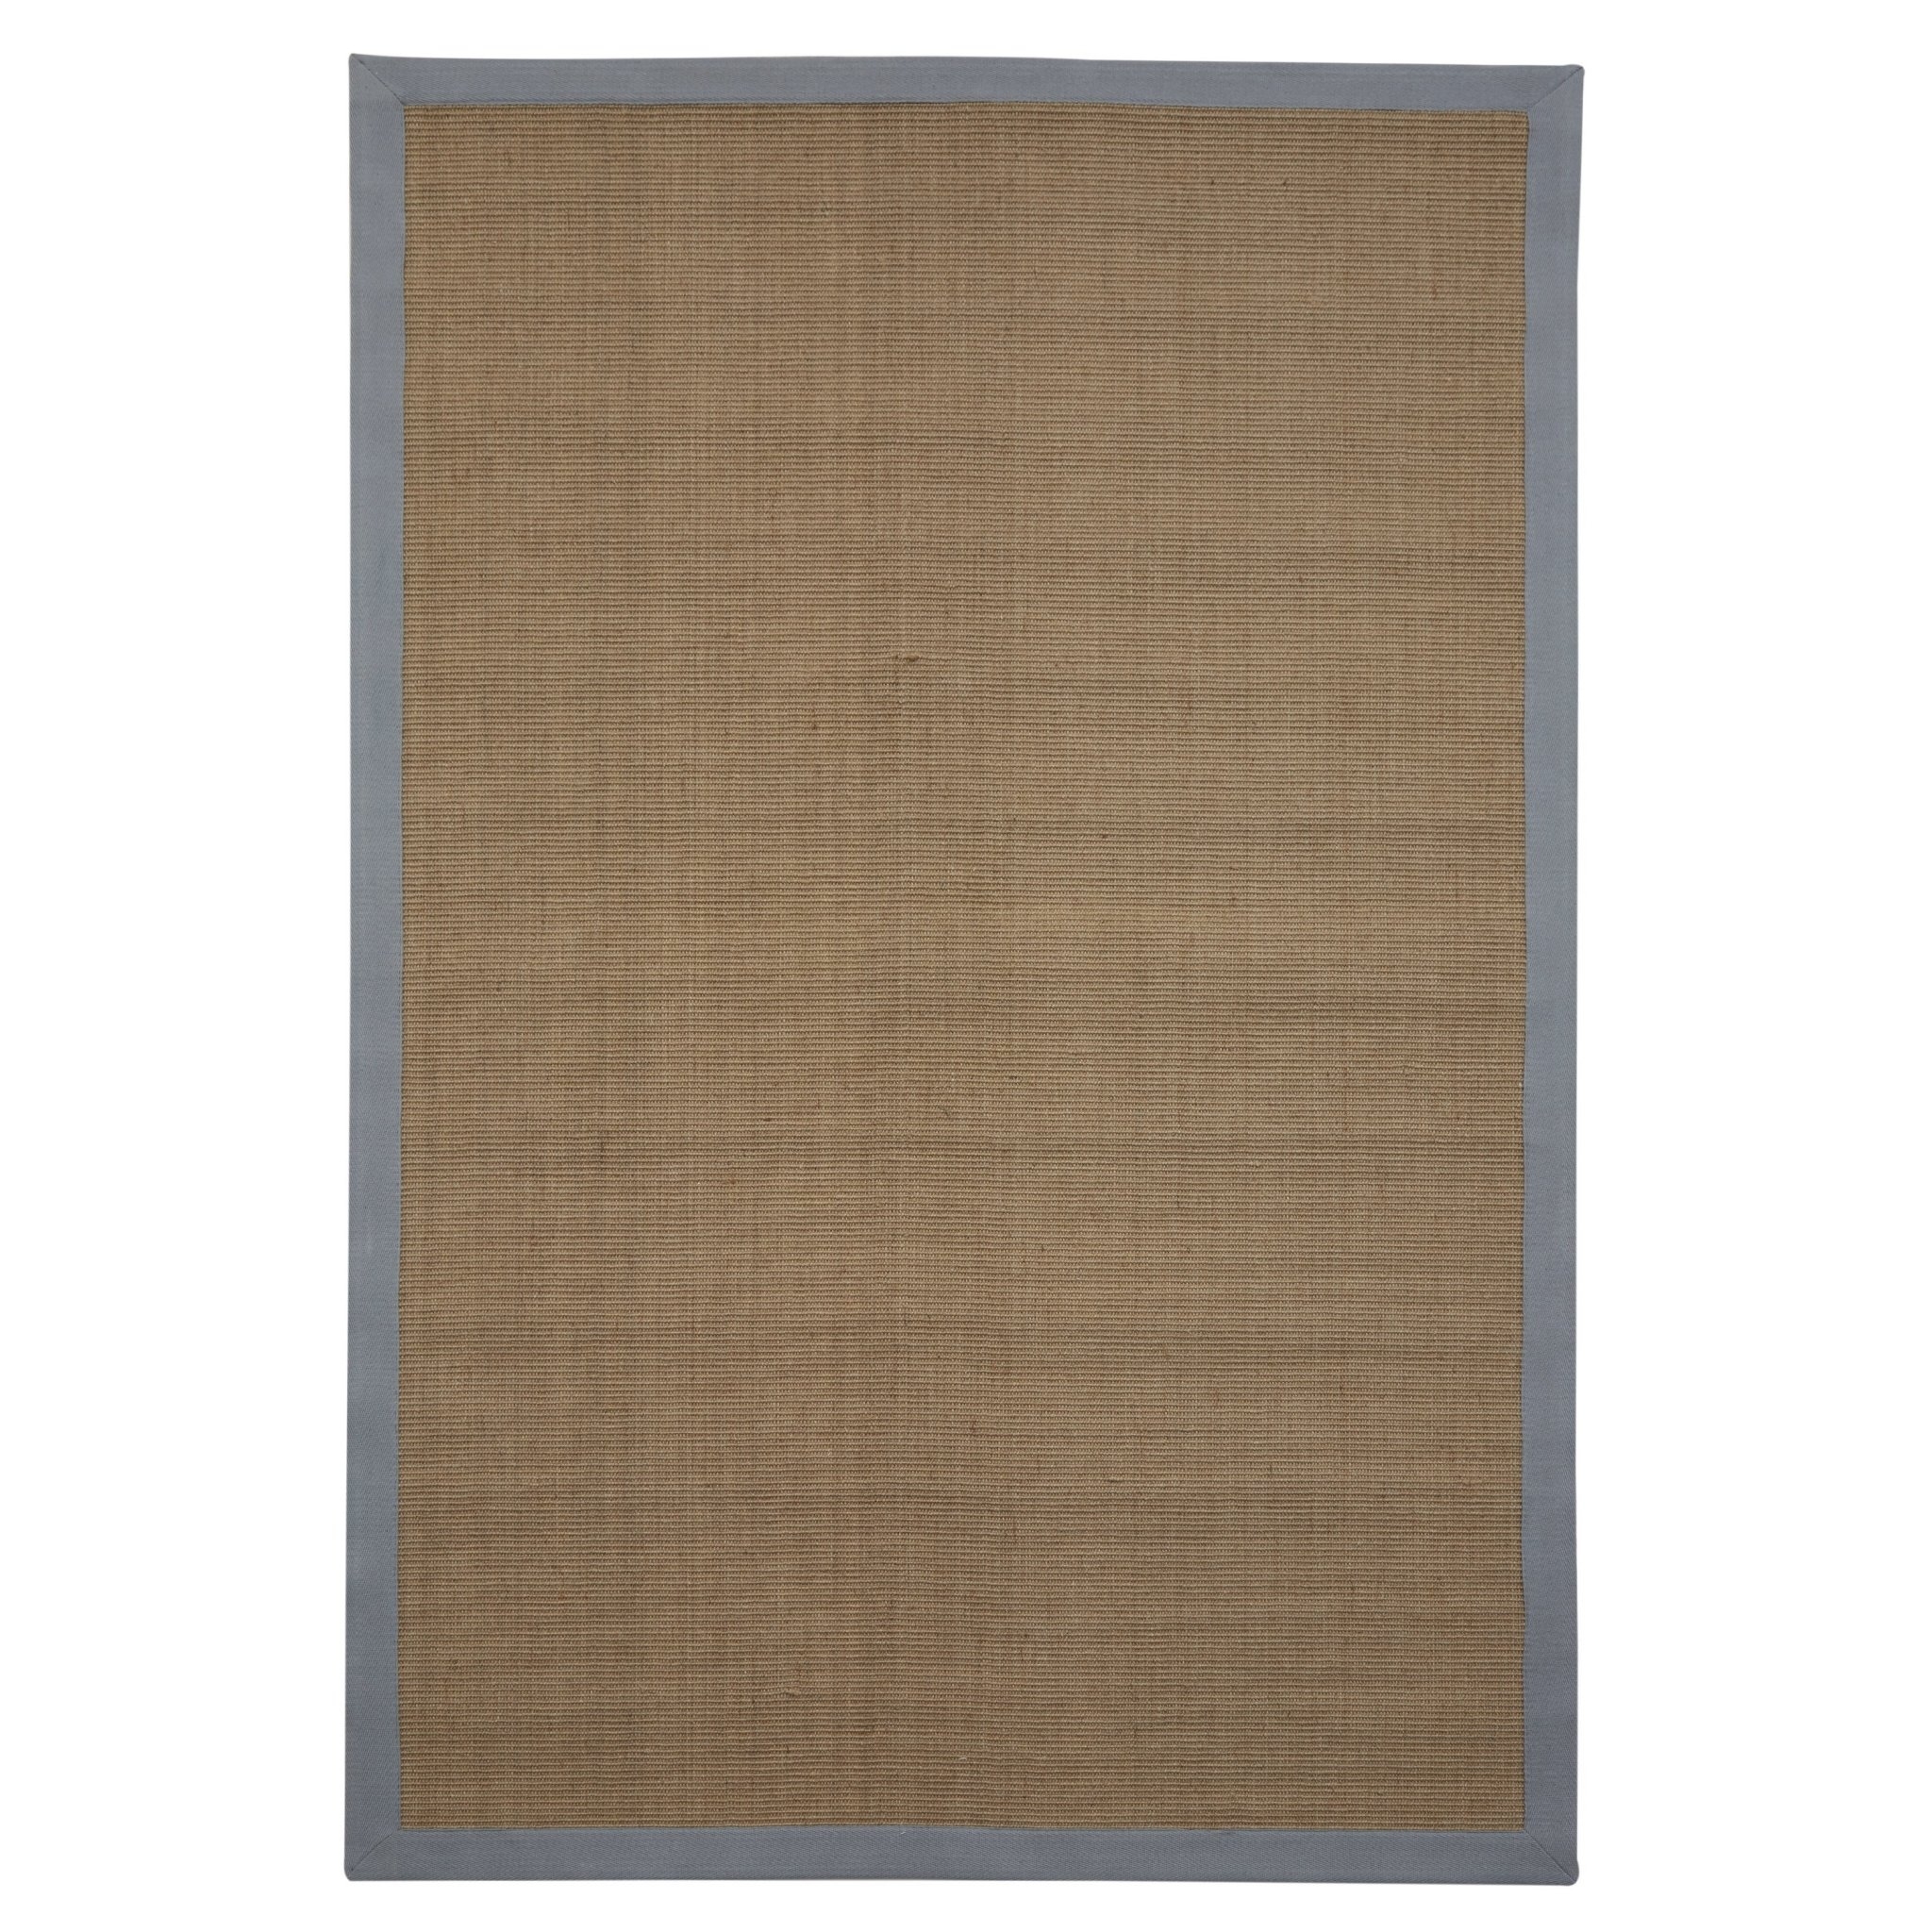 Chelsea Jute Rug with Cotton Grey Border 150x190cm by Native Home & Lifestyle – Furniture & Homeware – The Luxe Home